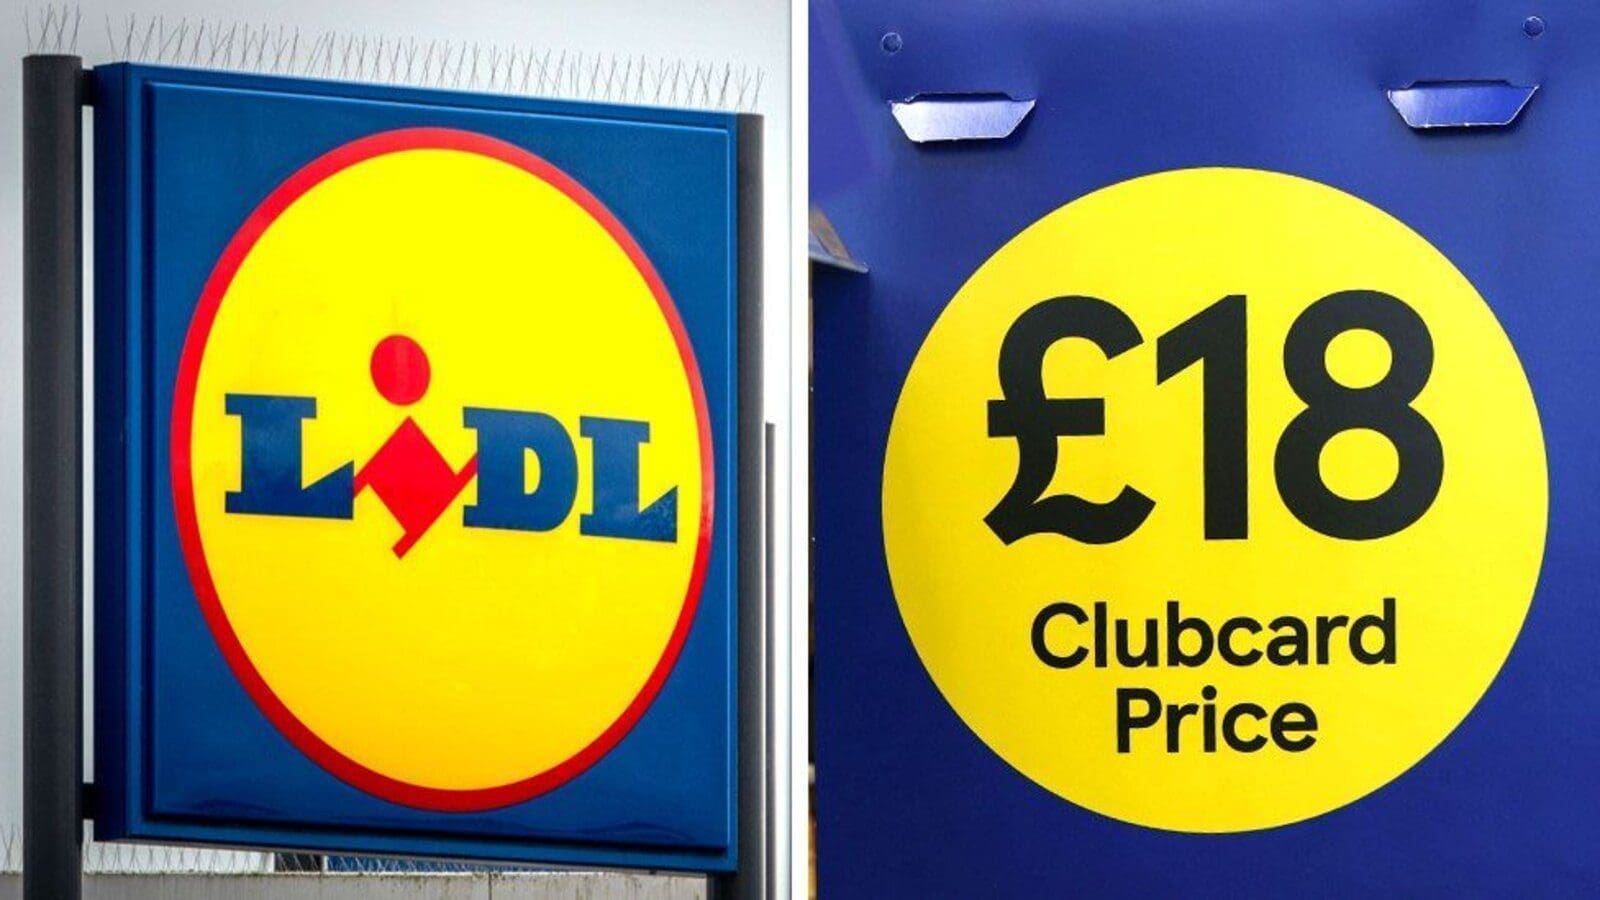 Lidl granted injunction to stop Tesco from copying its logo